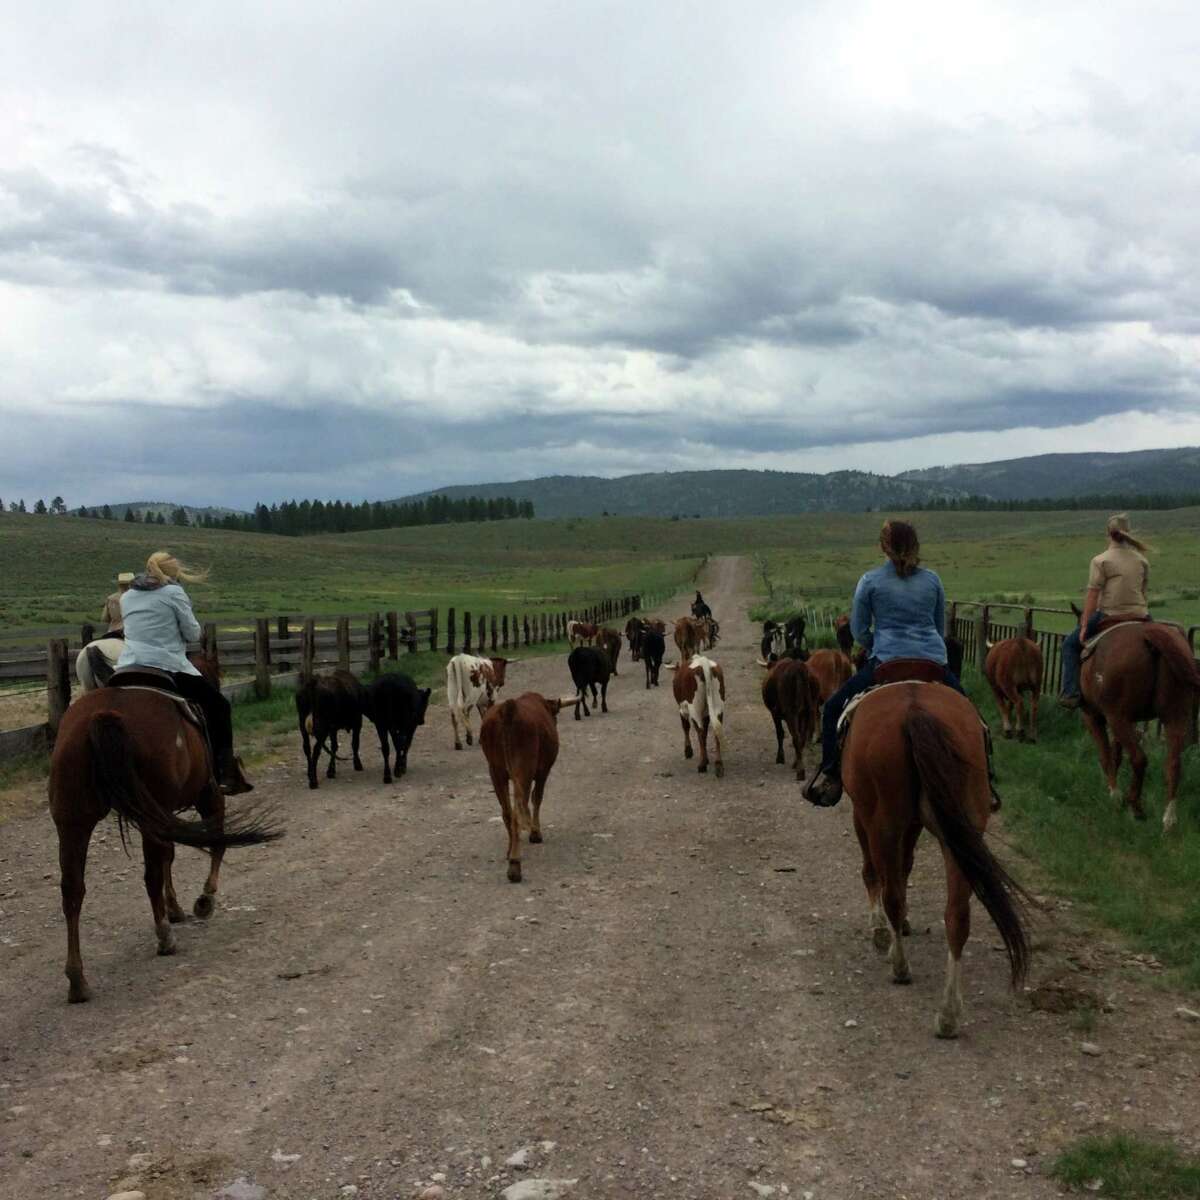 During the cattle drive activity at Resort at Paws Up, guests saddle up and set out to gather cattle, sort them and then trail them back to the home pasture.